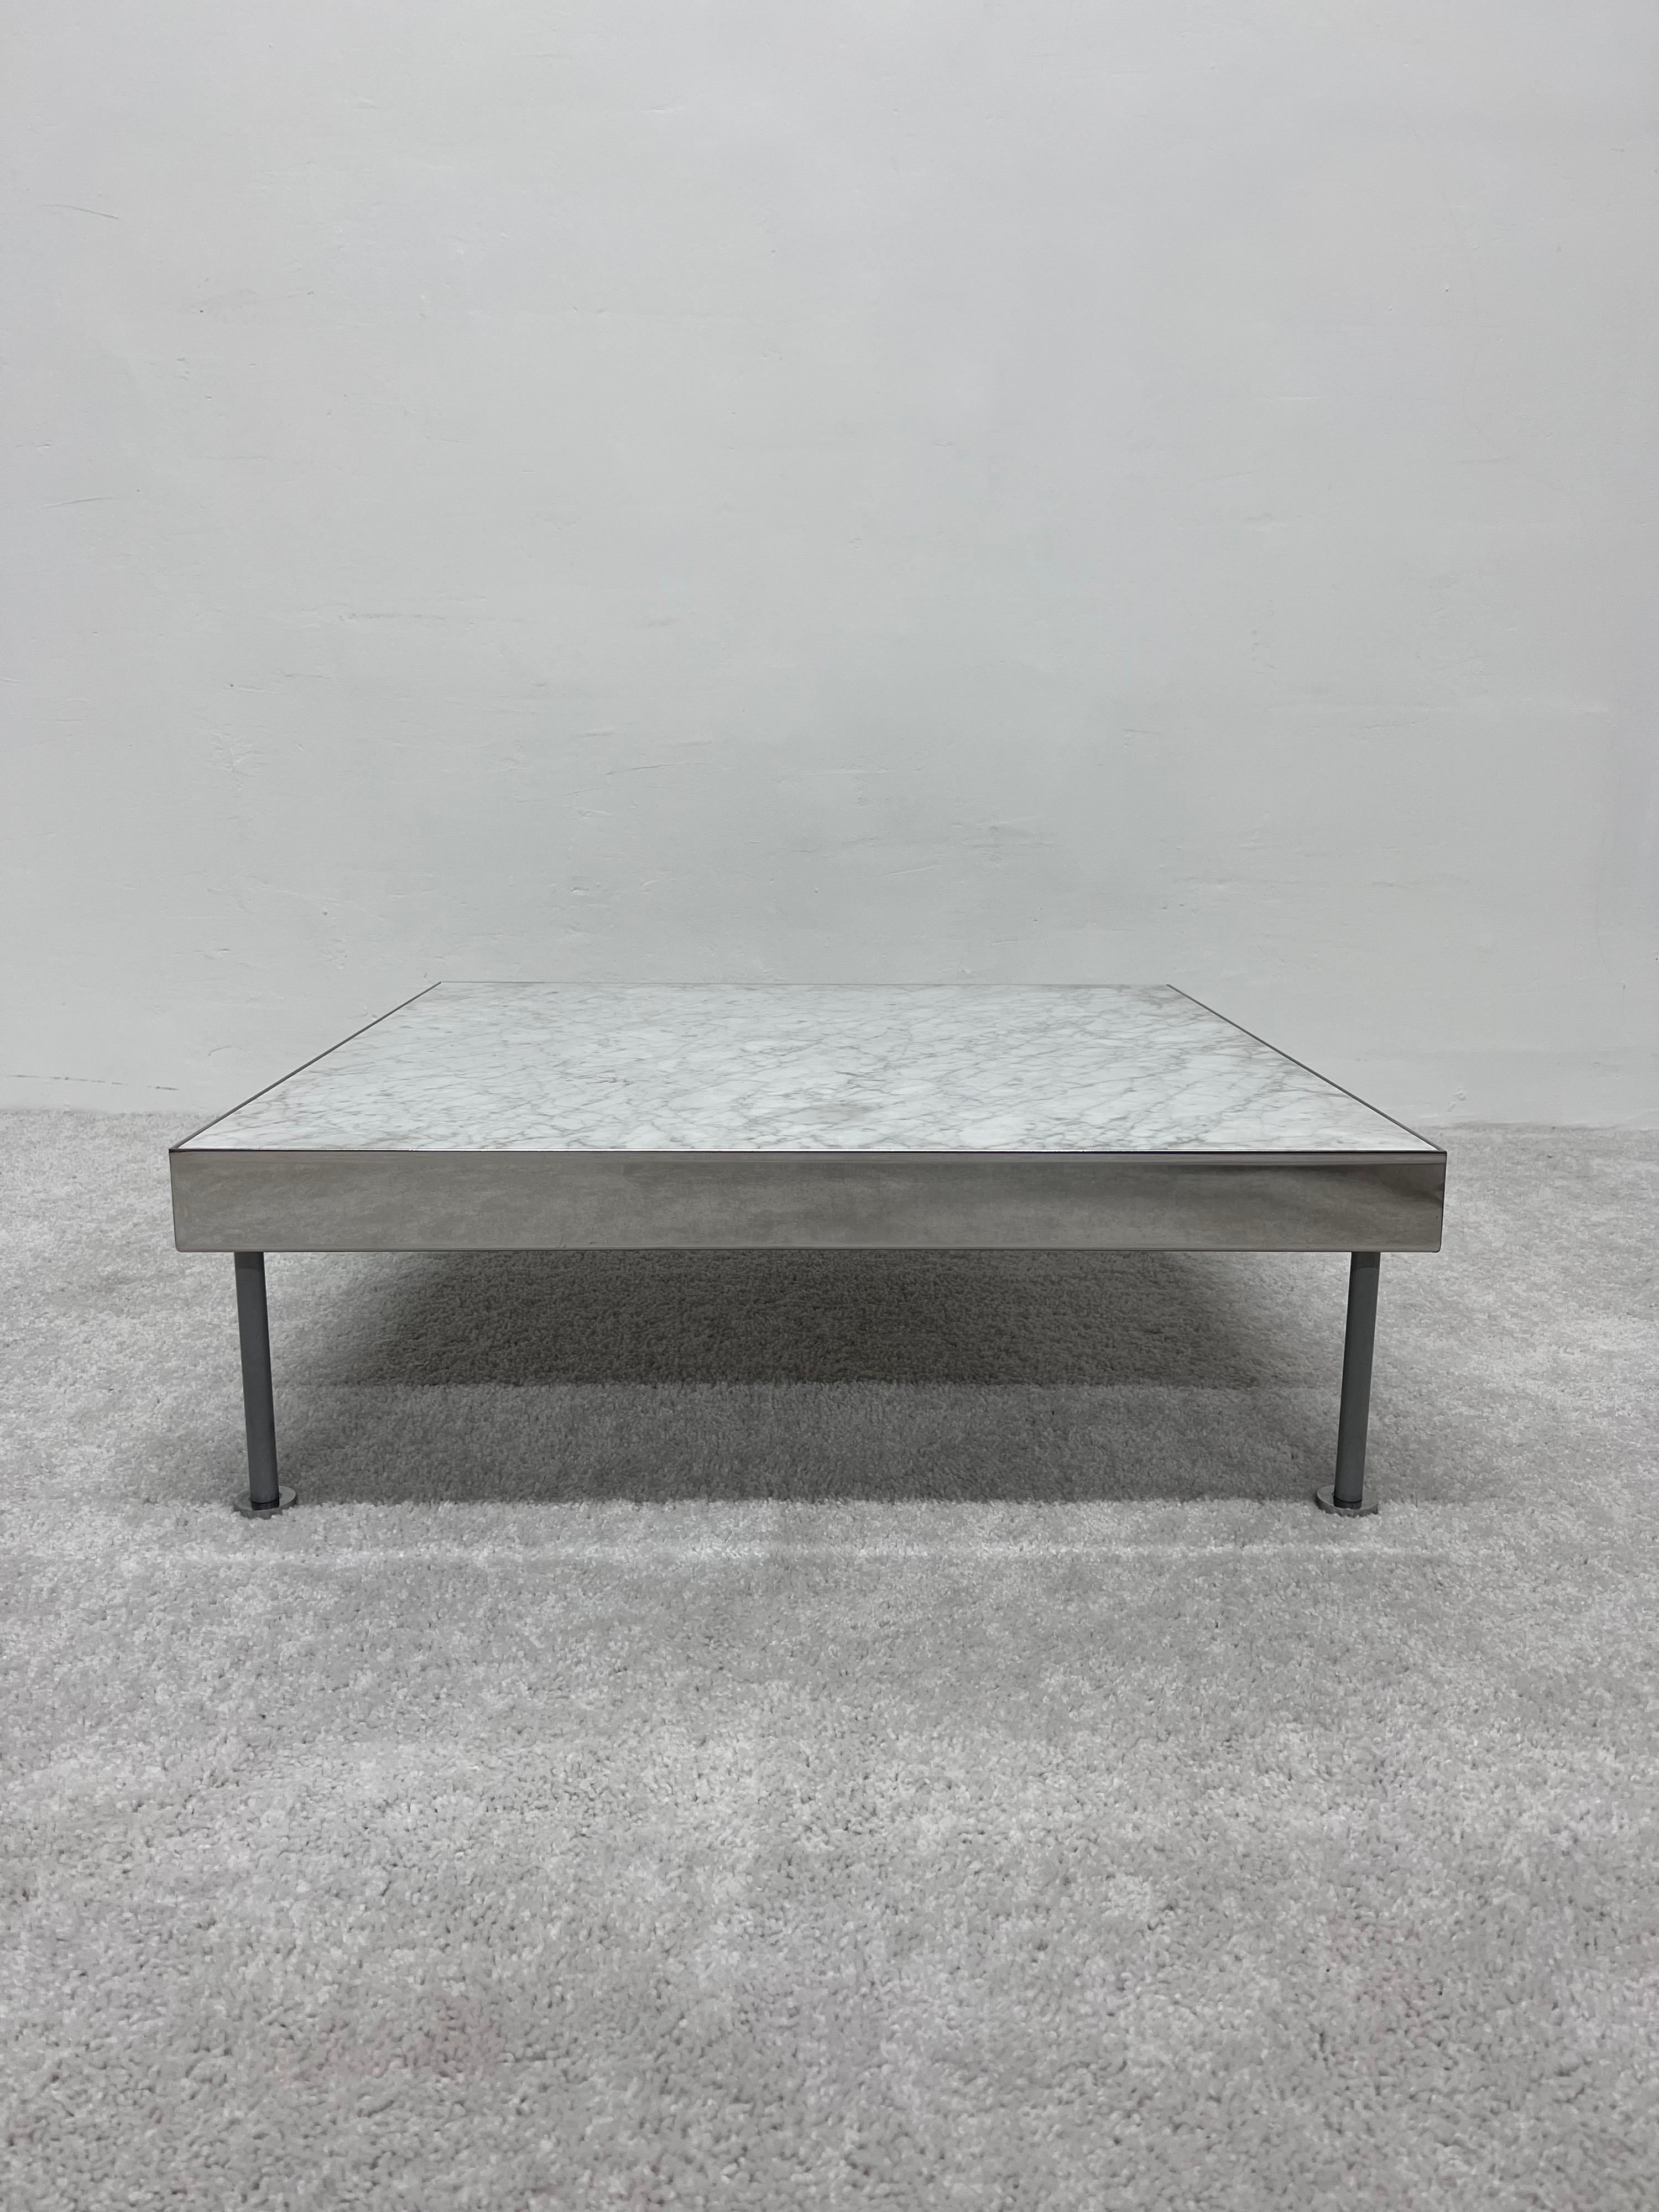 Contemporary Carrara Marble and Polished Steel Low Coffee Table, 1980s For Sale 3